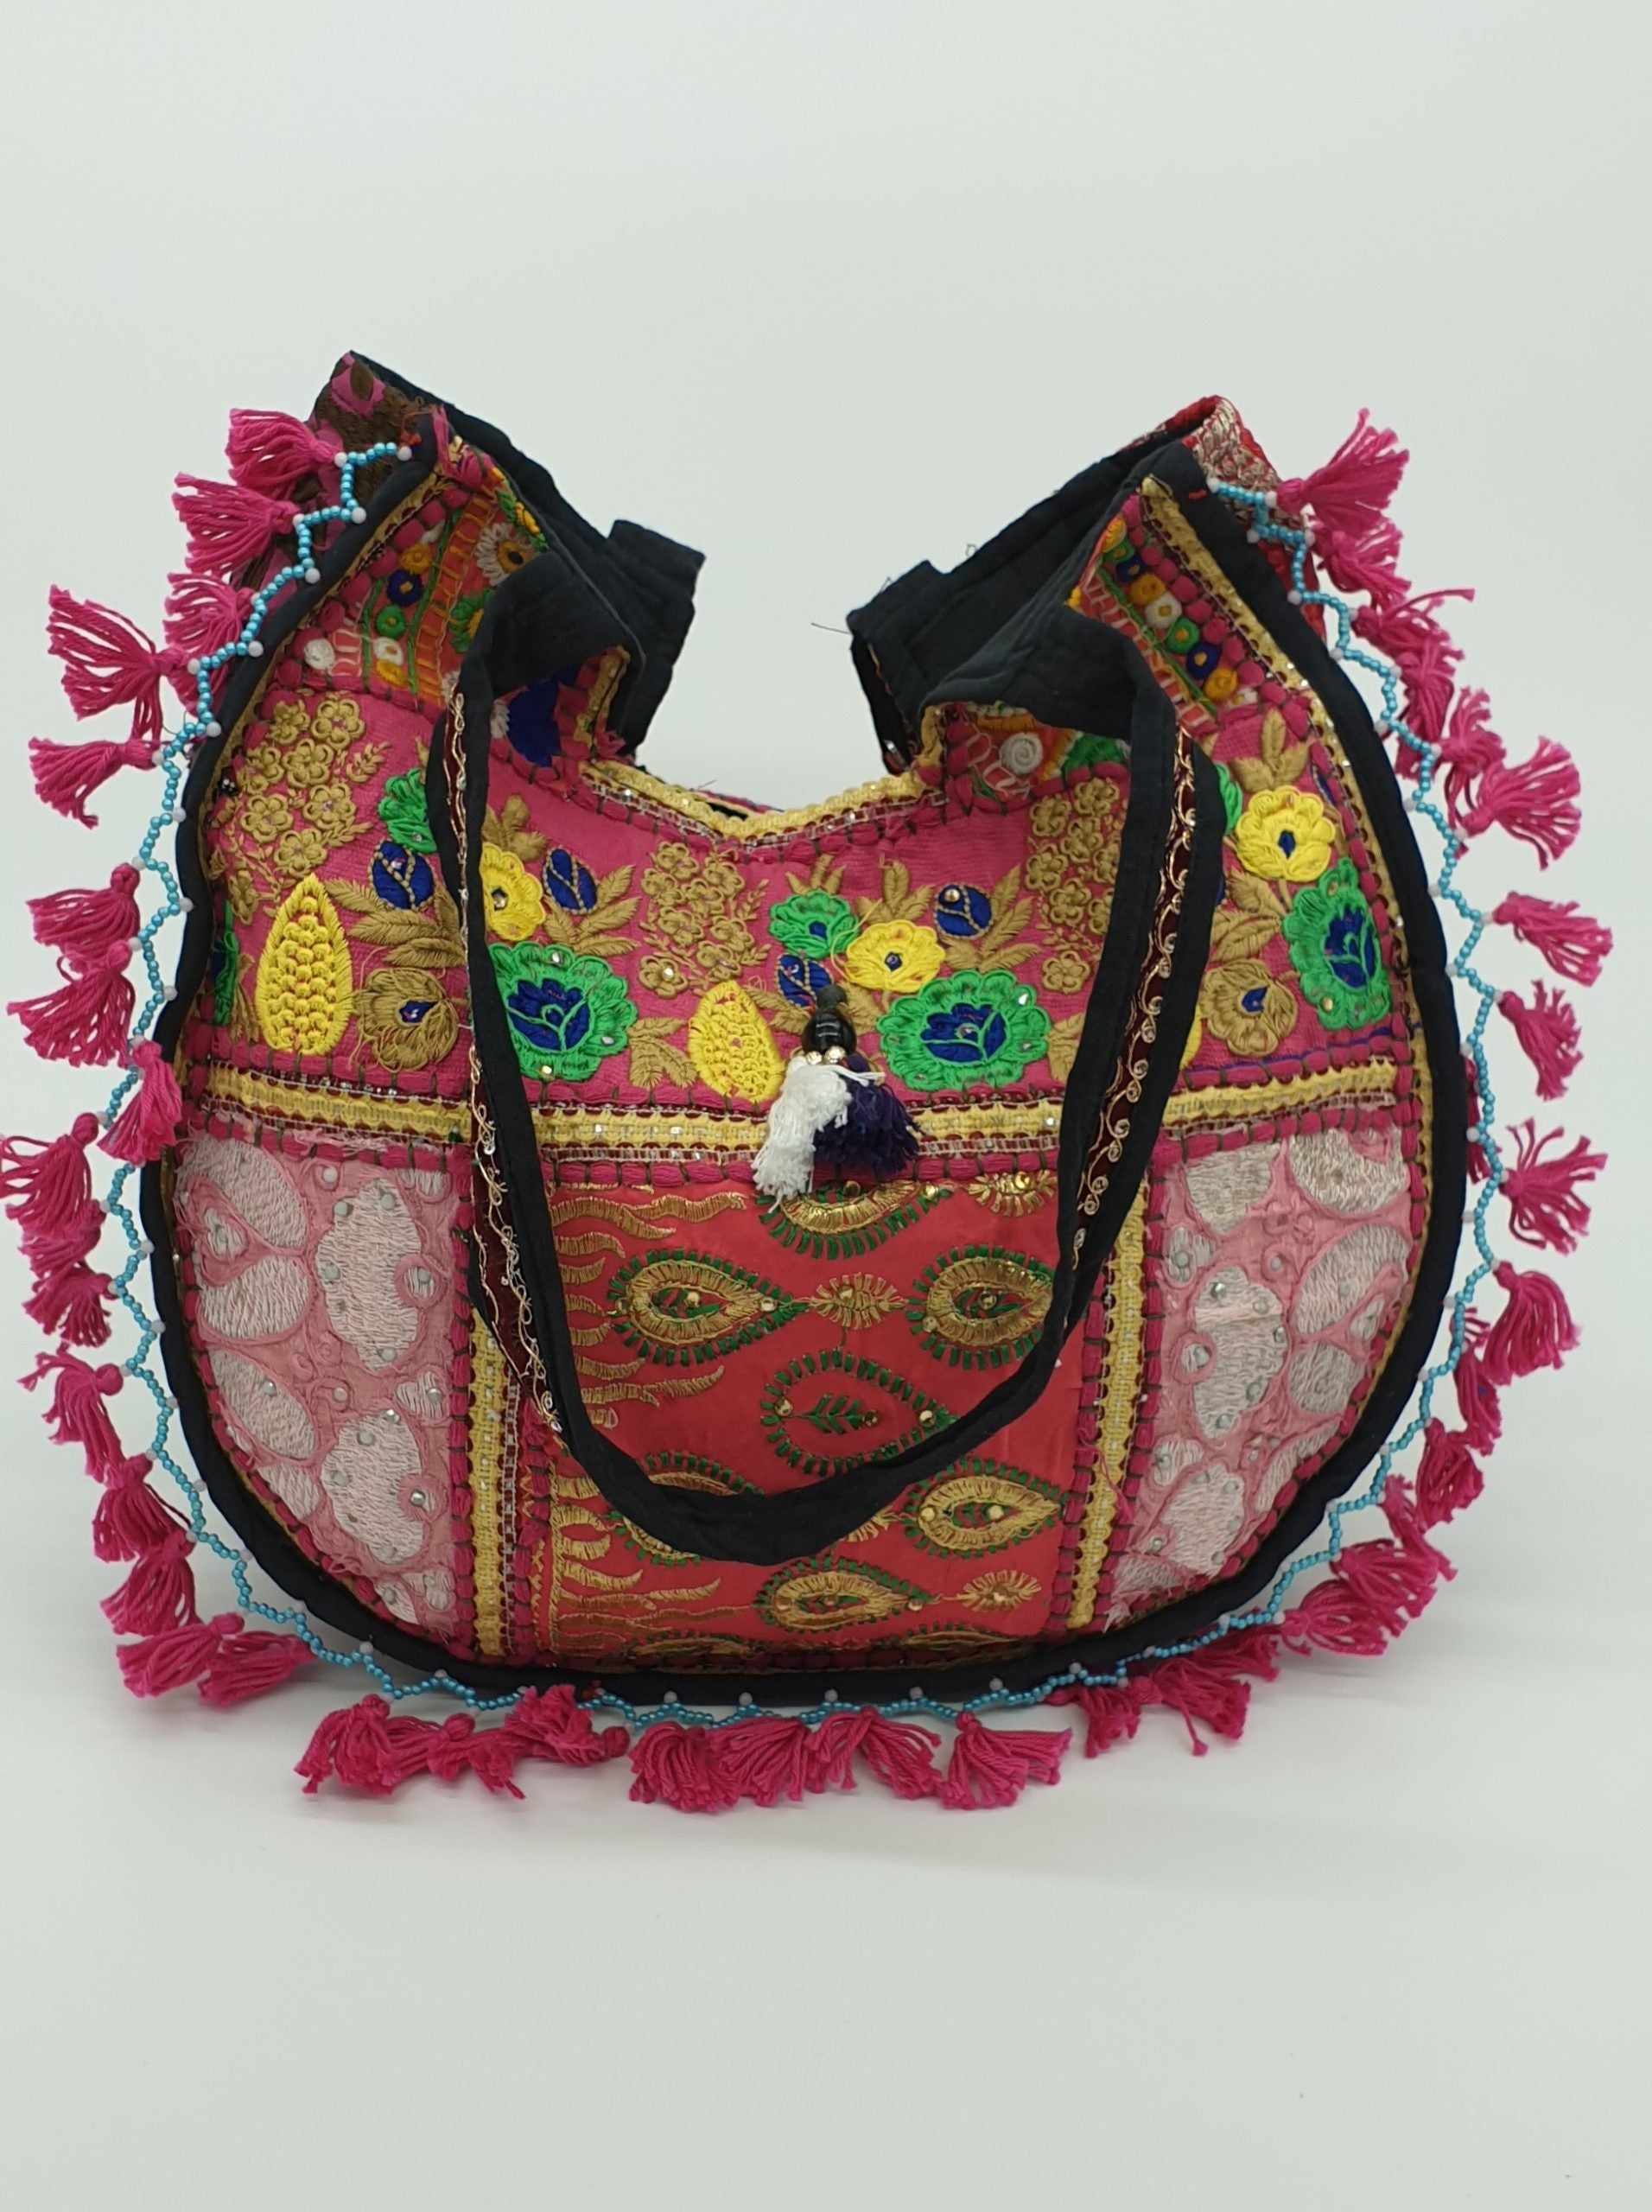 Artisan Large Recycled Embroidery Pink Hippy Patchwork Handbag